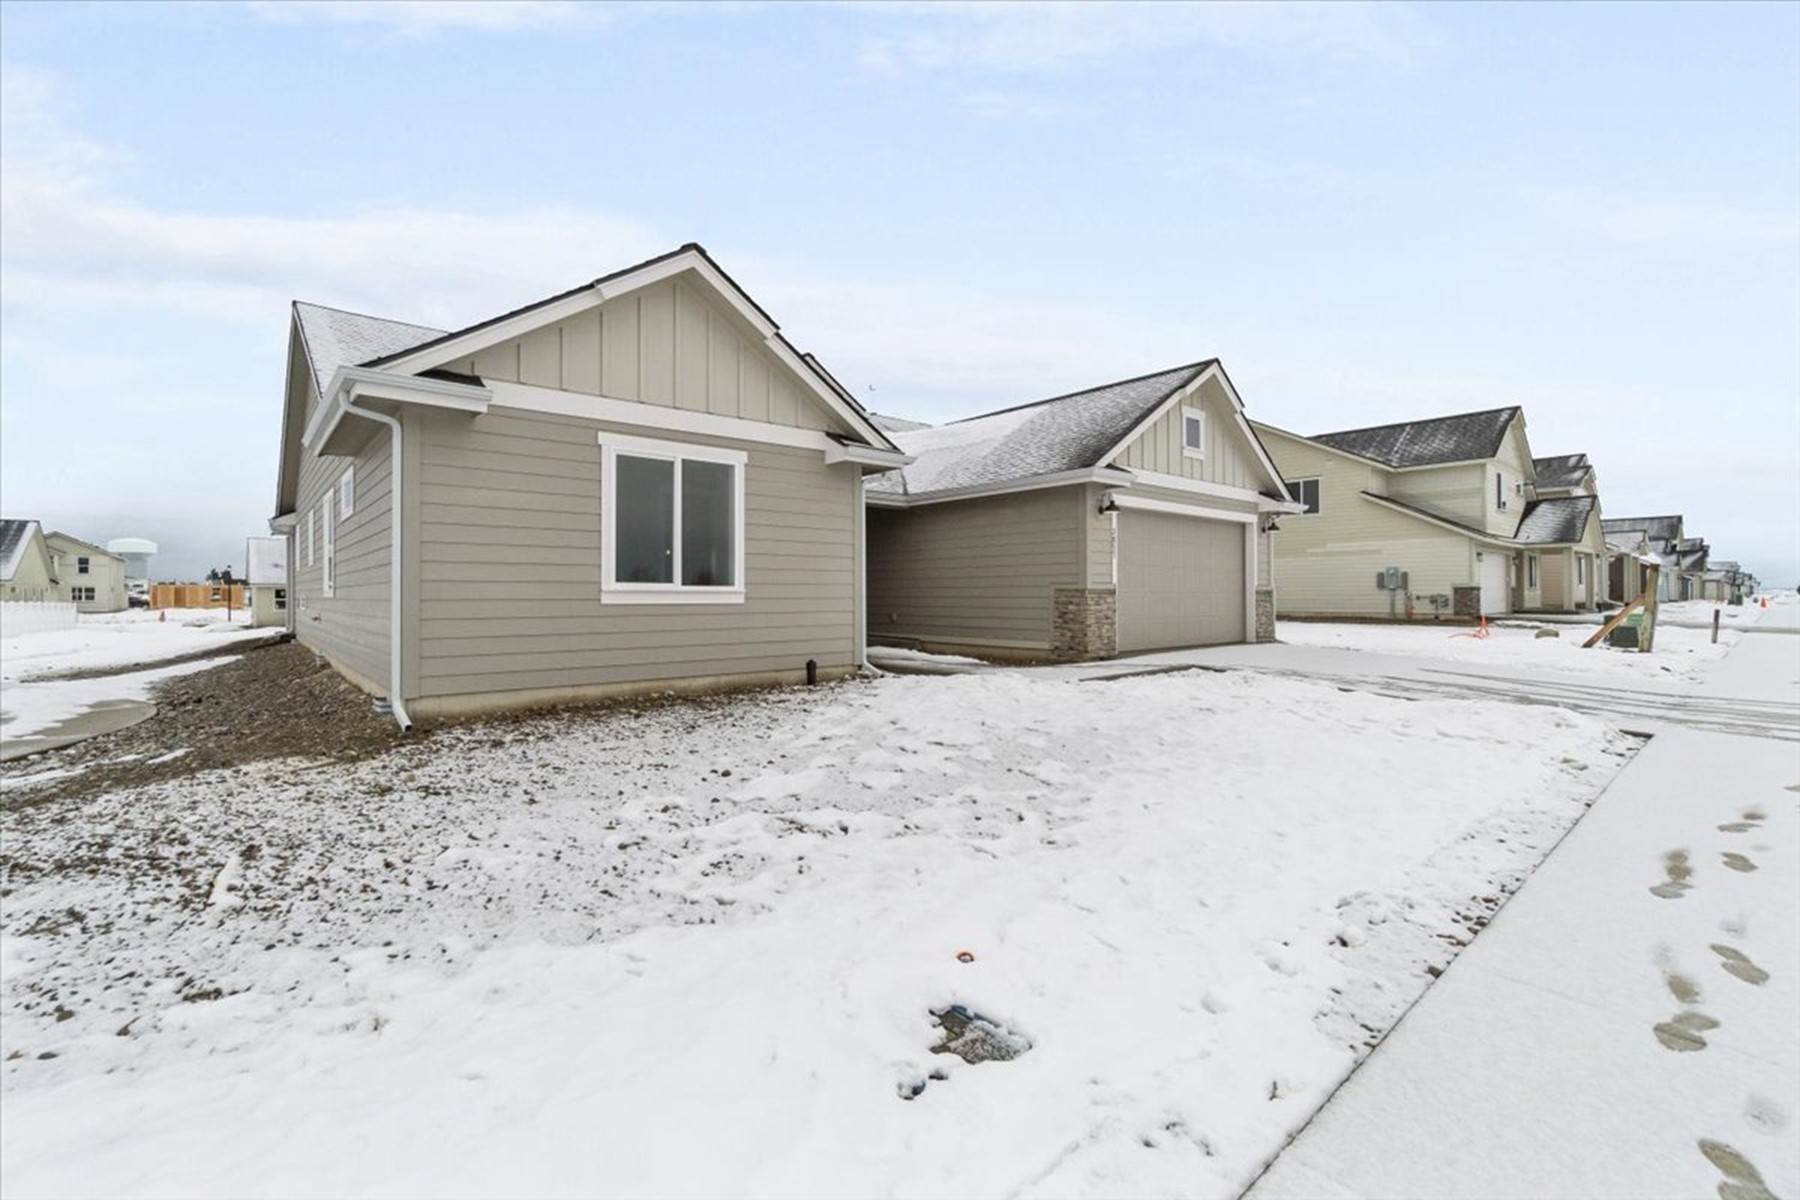 4. Single Family Homes for Sale at The Fairview w/Add'l Detatched Garage 3057 N Cassiopeia St Post Falls, Idaho 83854 United States